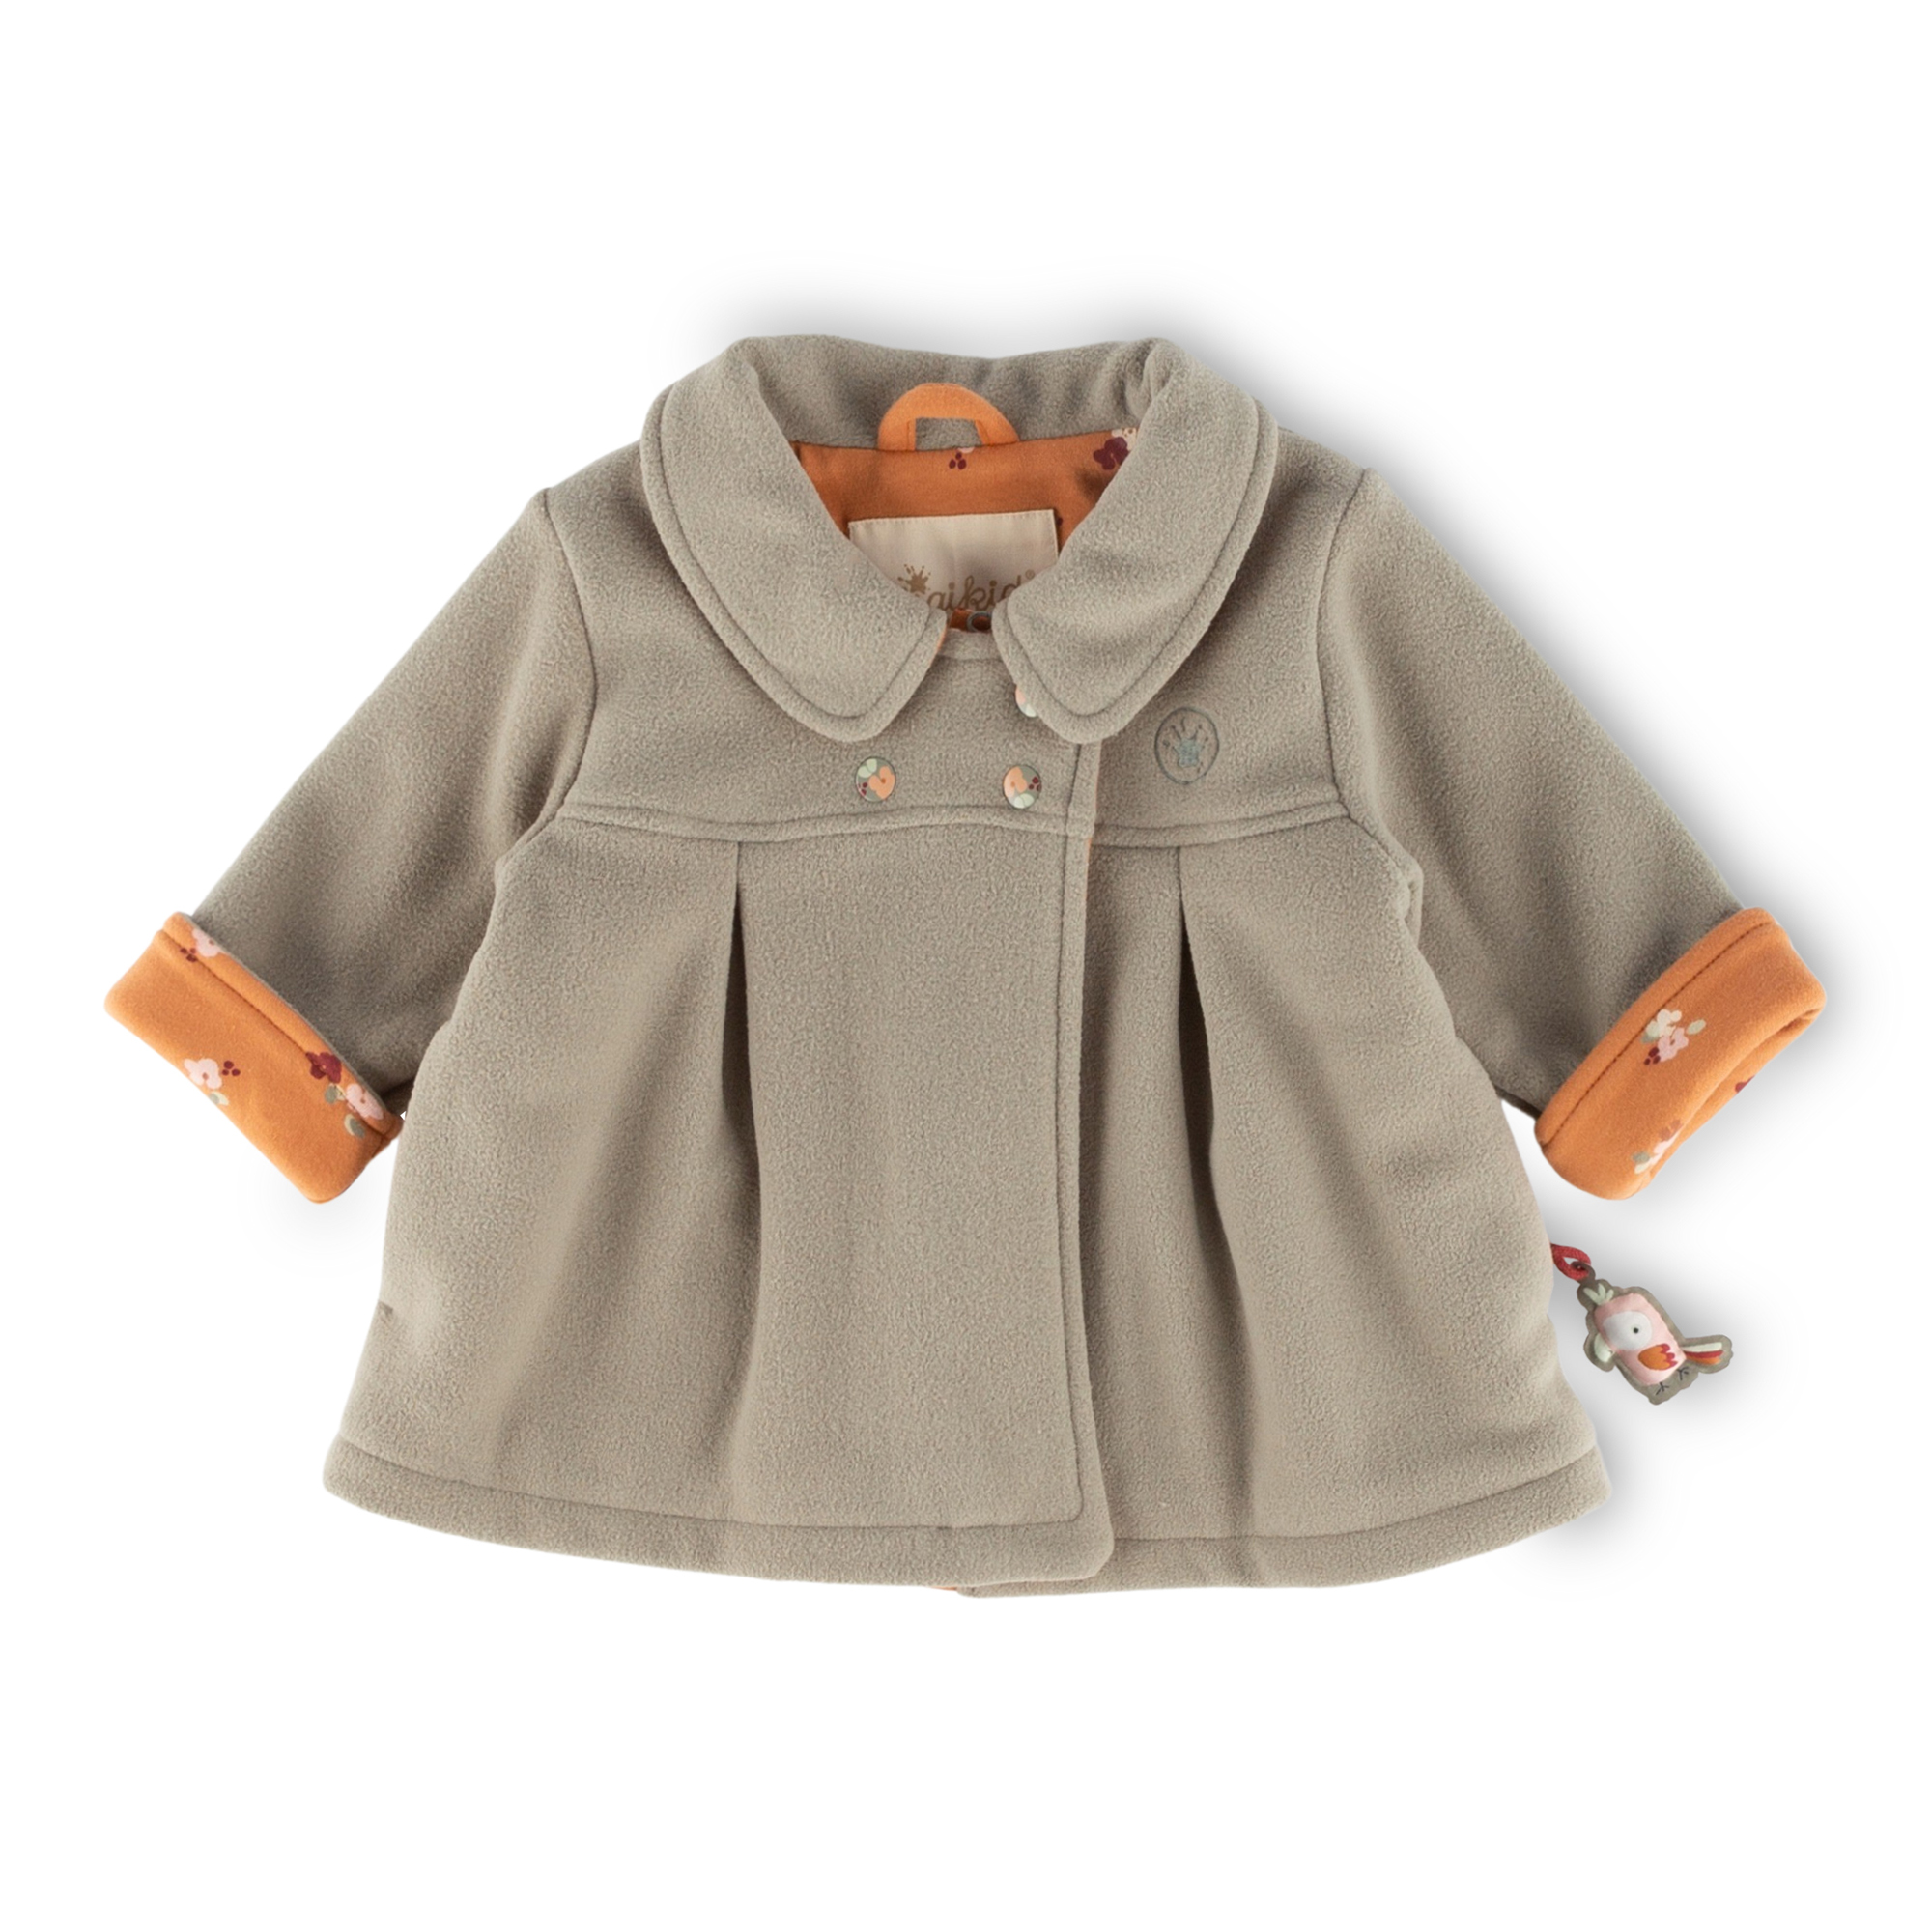 Collared baby fleece jacket pastel green, lined